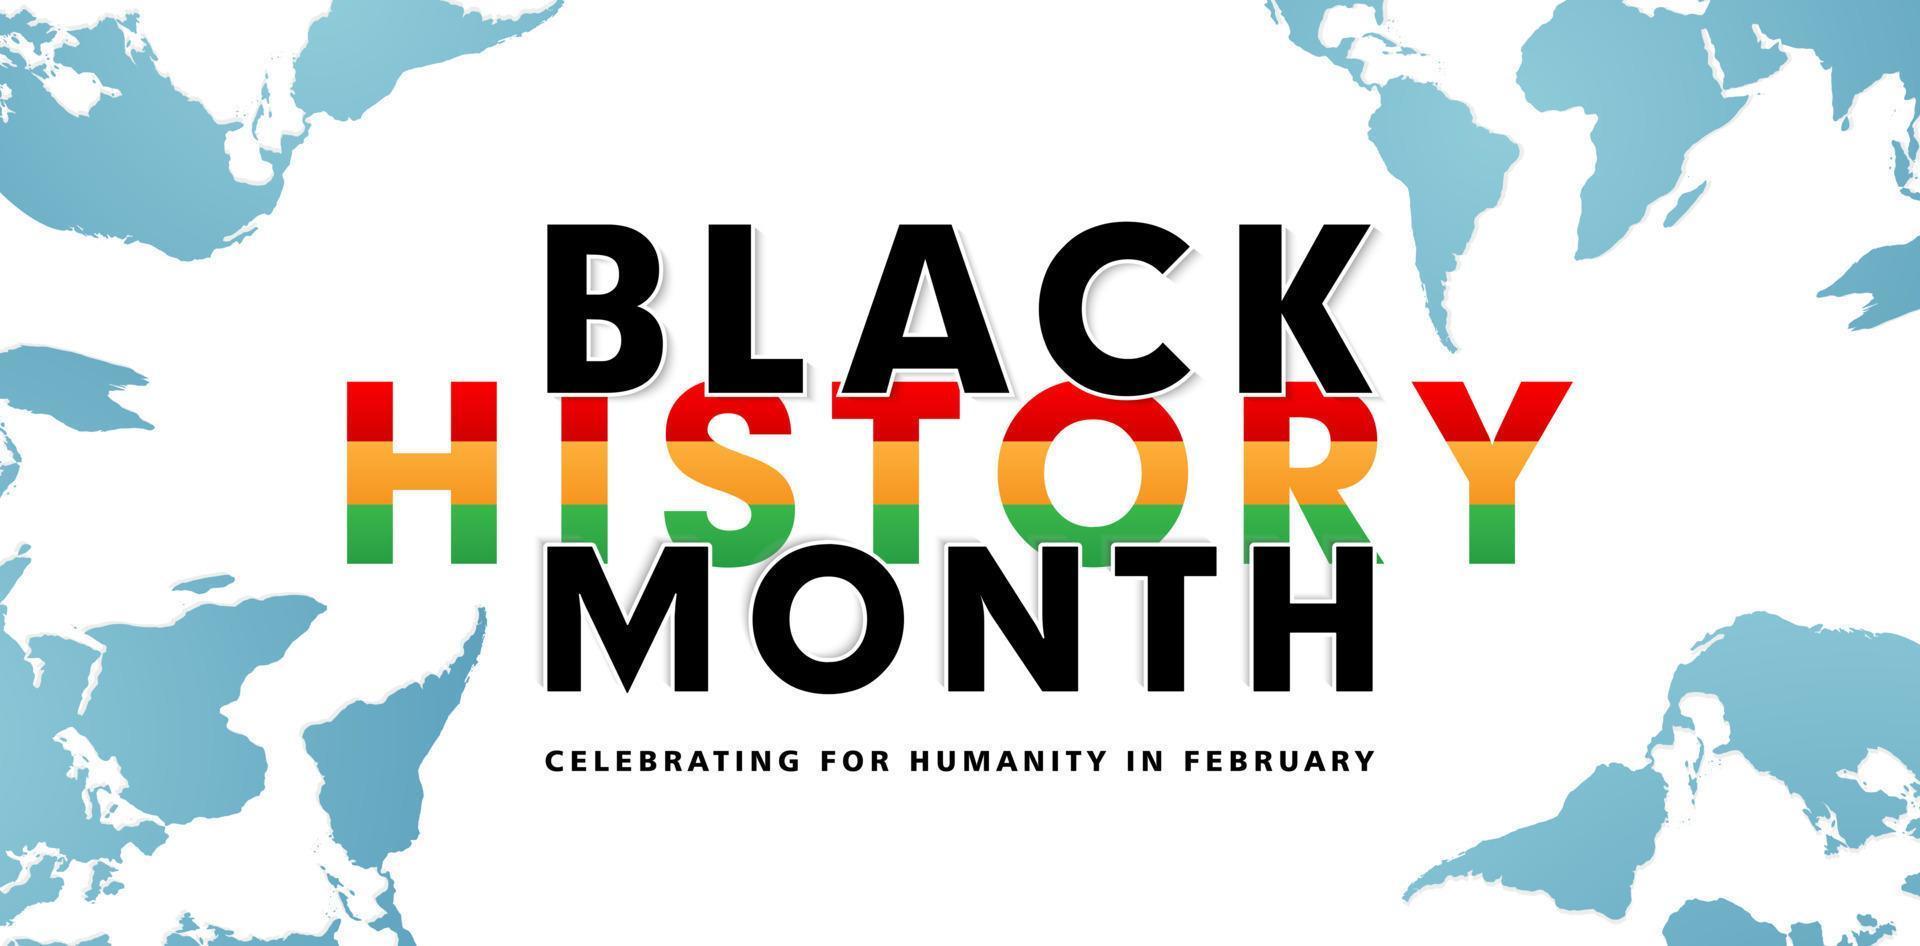 world map web with words black history month, illustration of celebrating on a february, applicable for banner, poster, agency, billboard, website banner social media, corporate sign, printing media vector